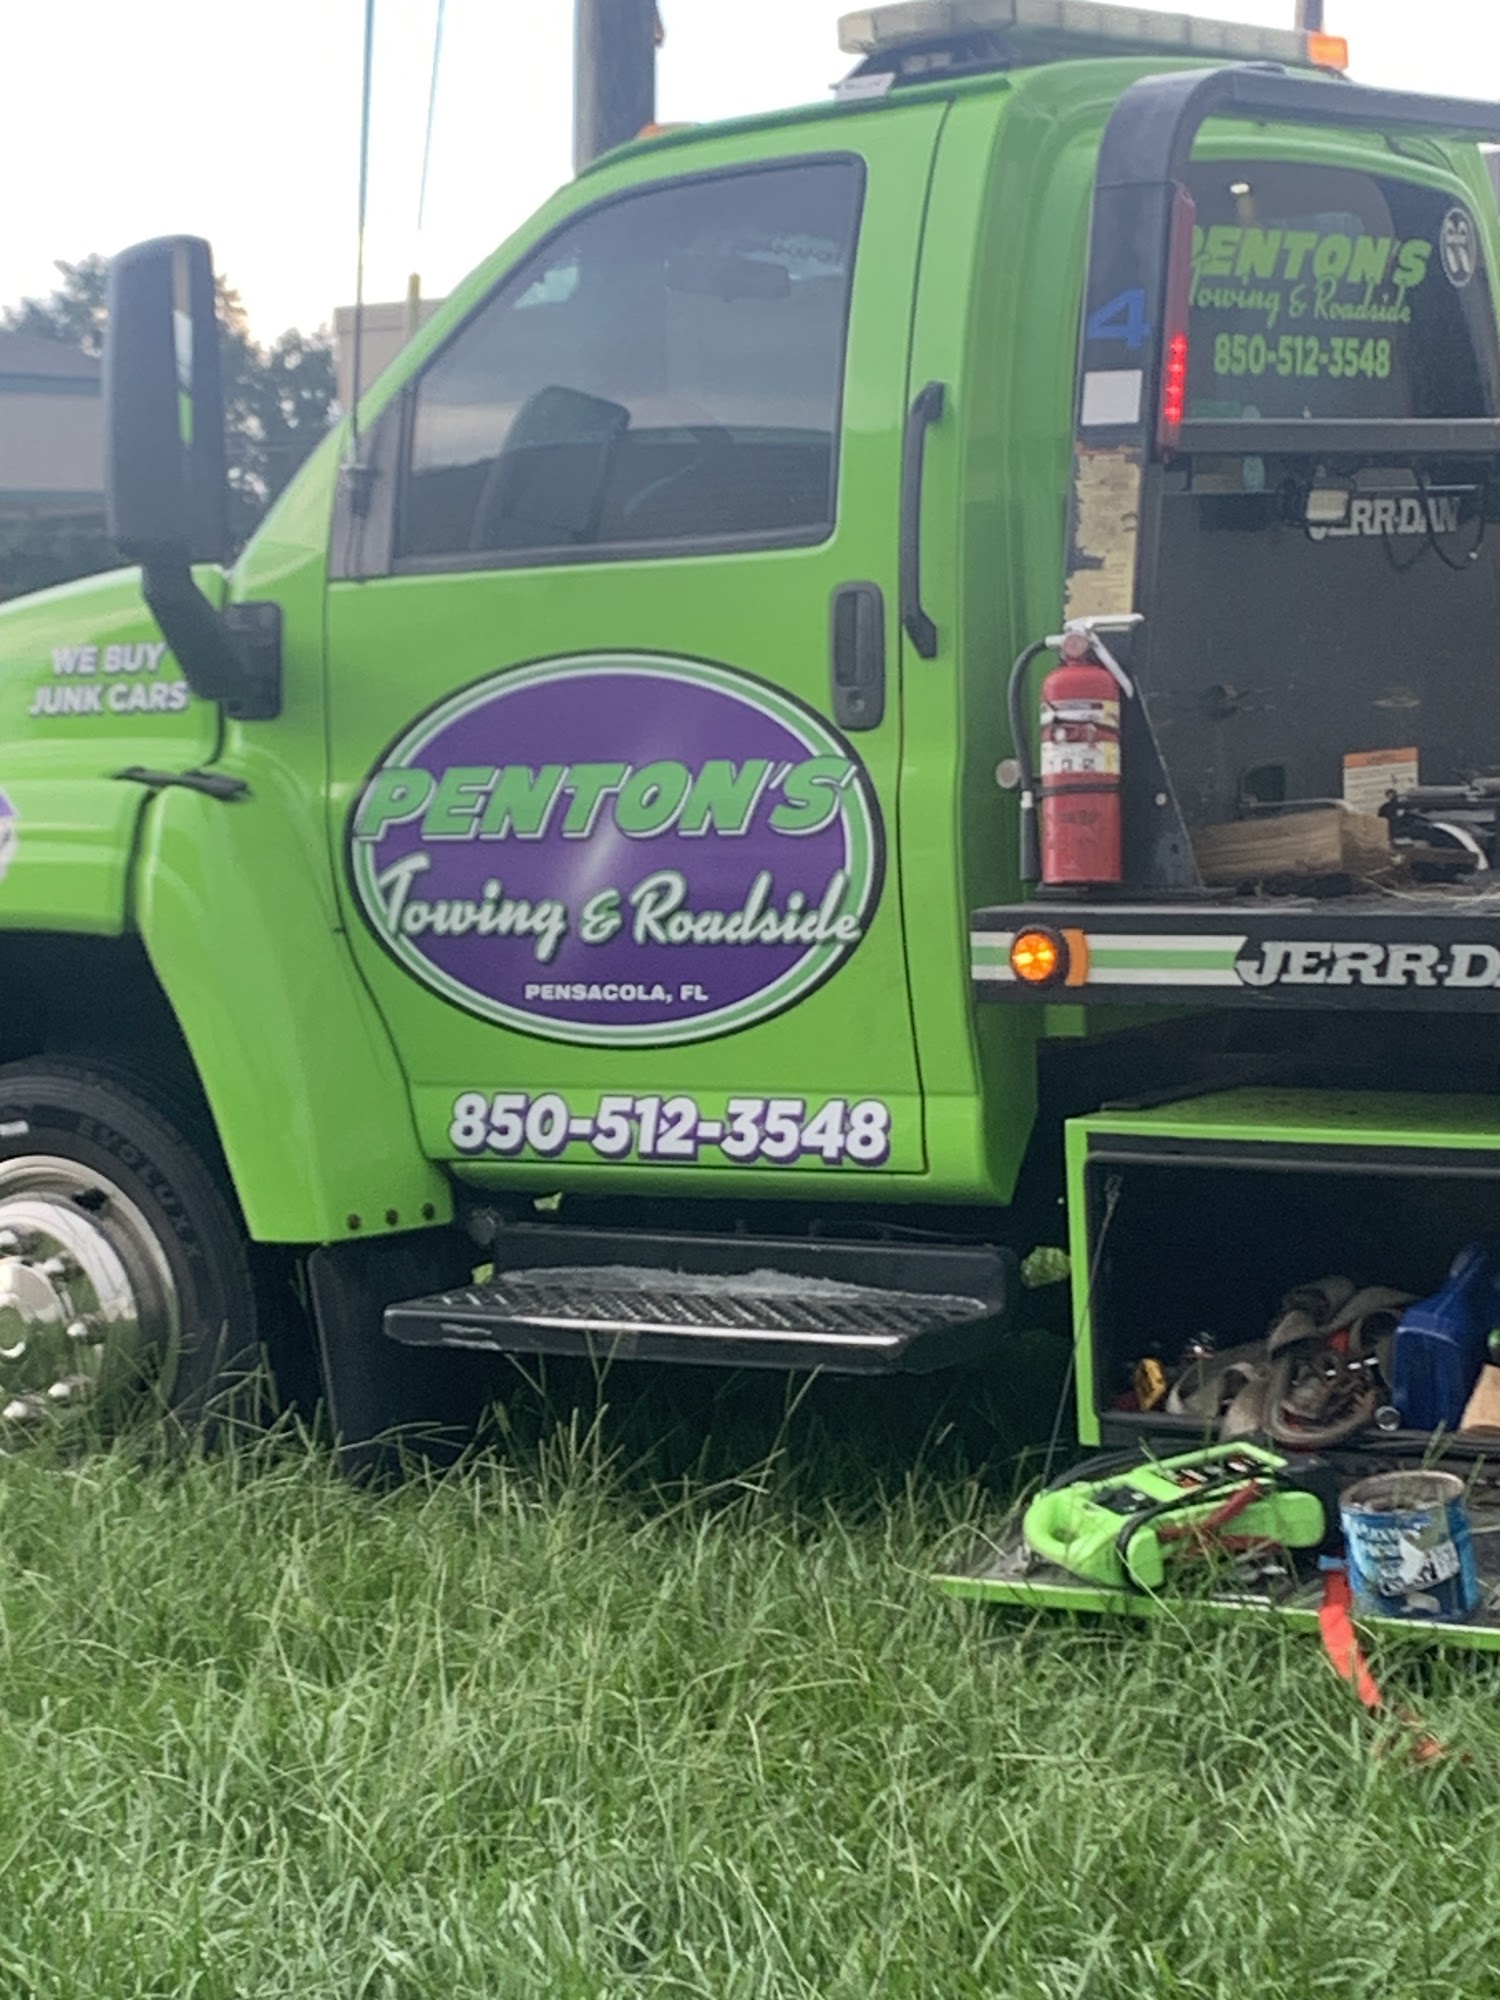 Penton's Towing And Roadside